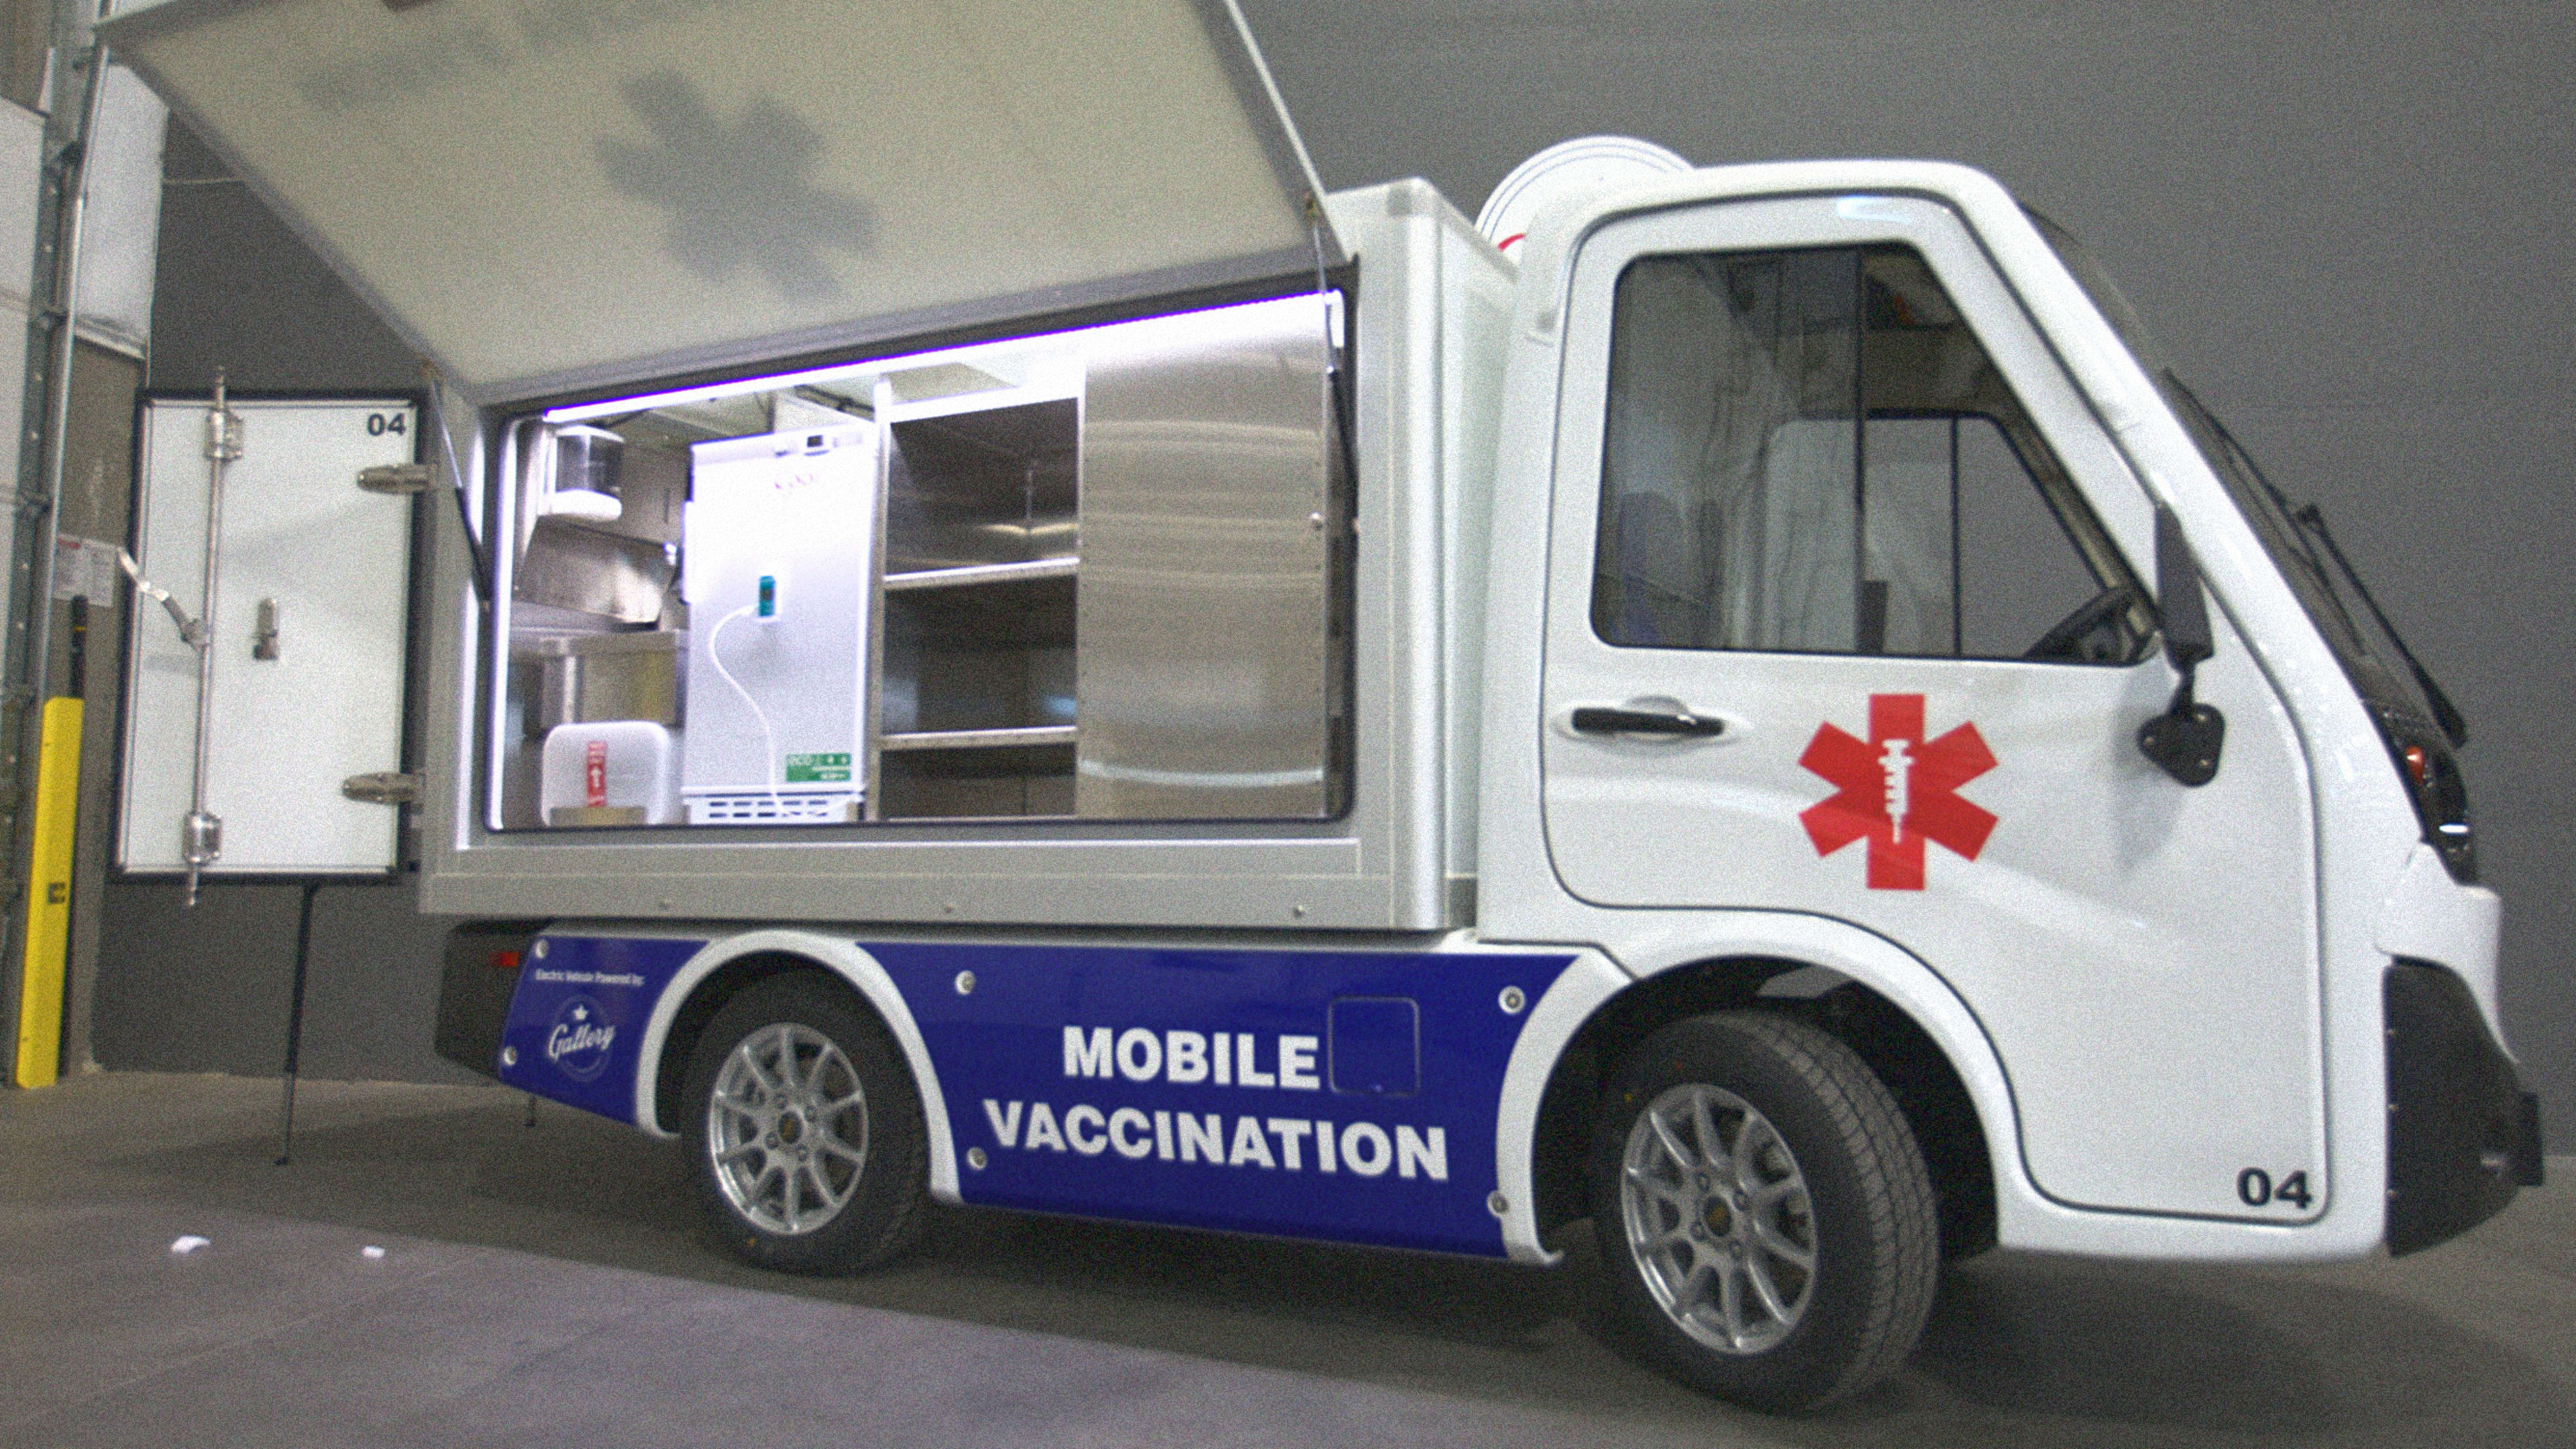 This cute little electric truck is a mobile vaccine unit